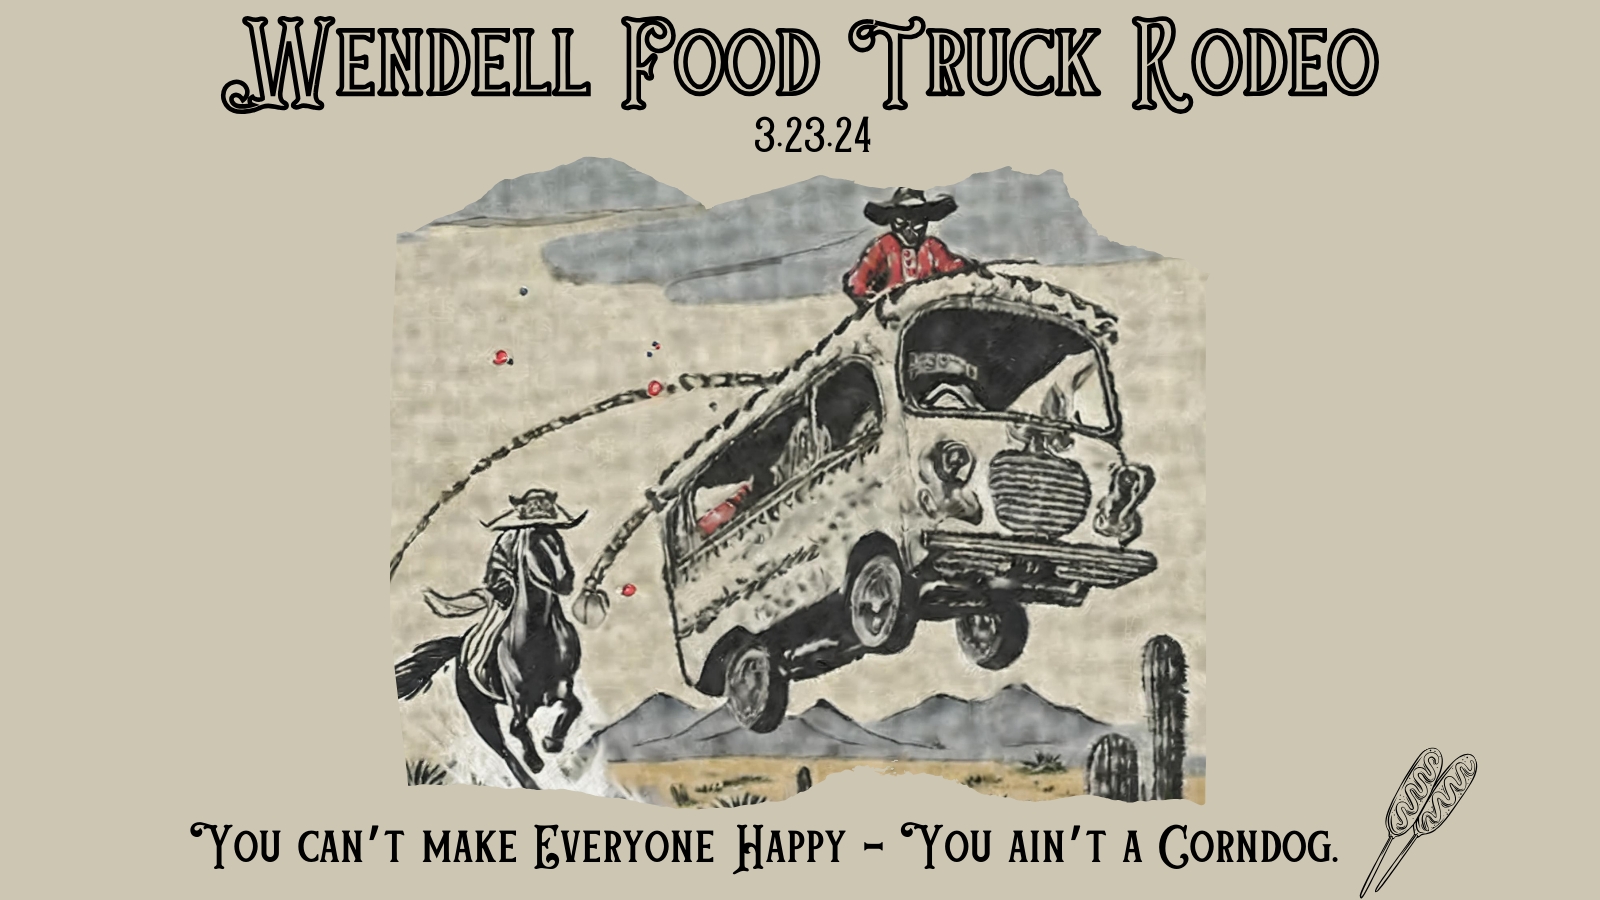 Wendell Food Truck Rodeo